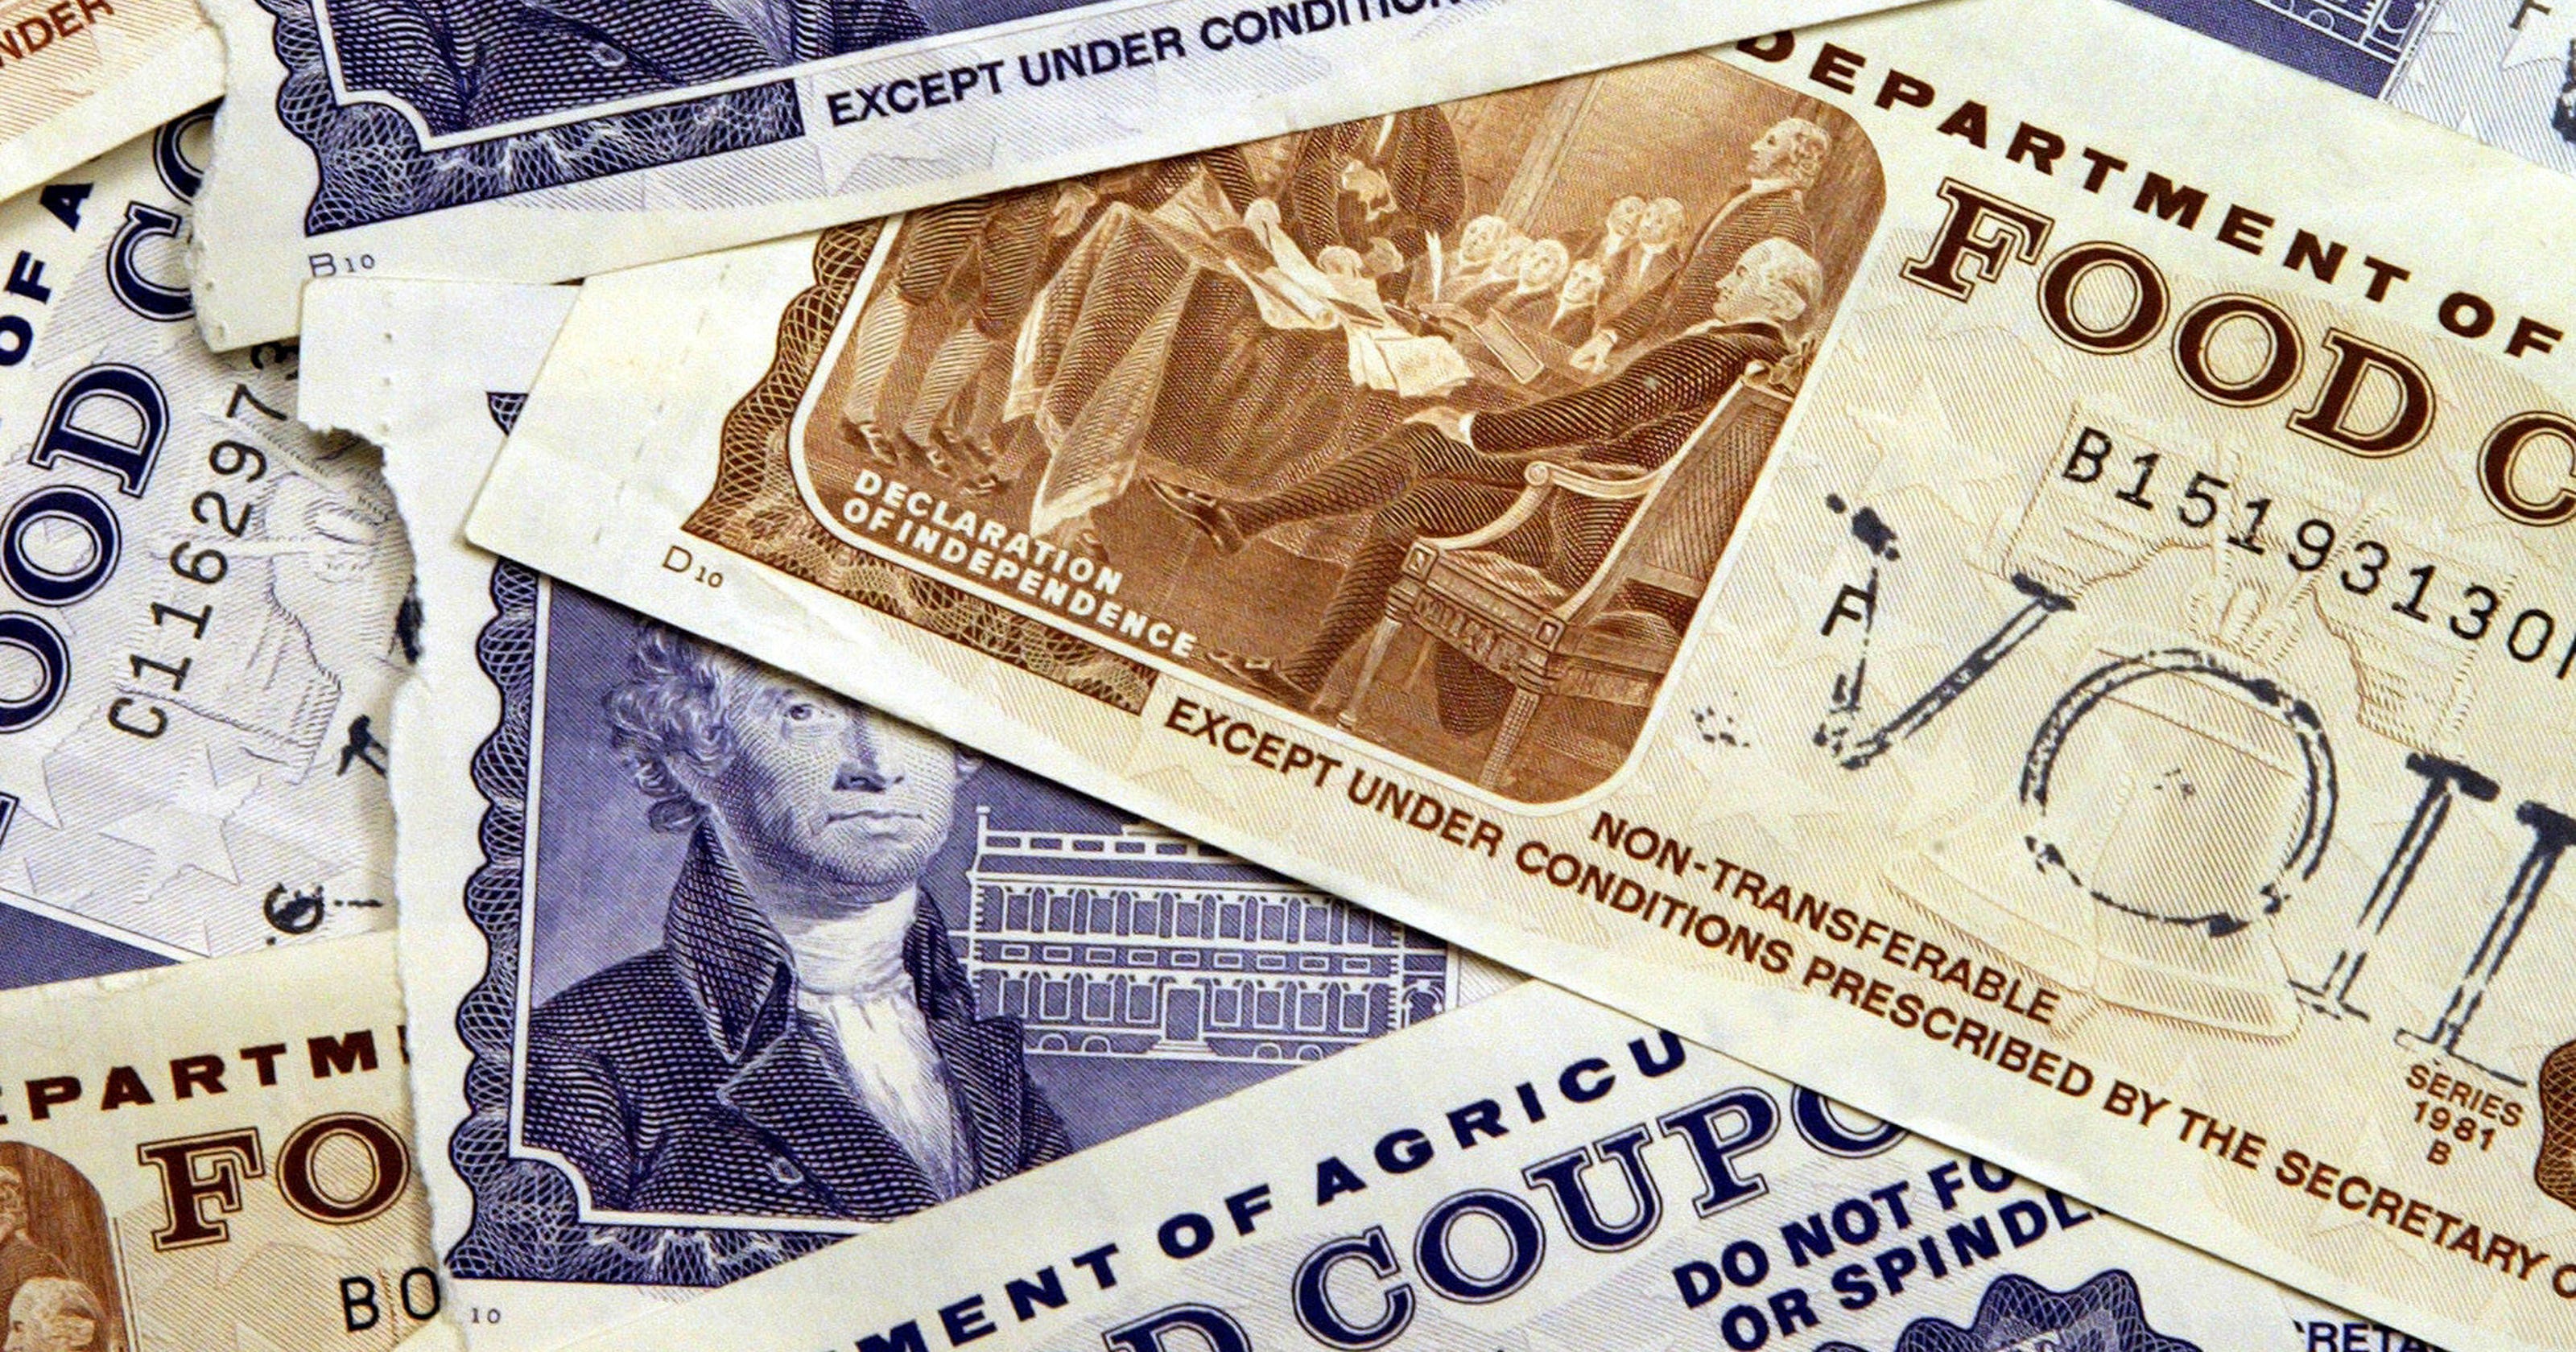 Michigan on wrong side of food stamp fight